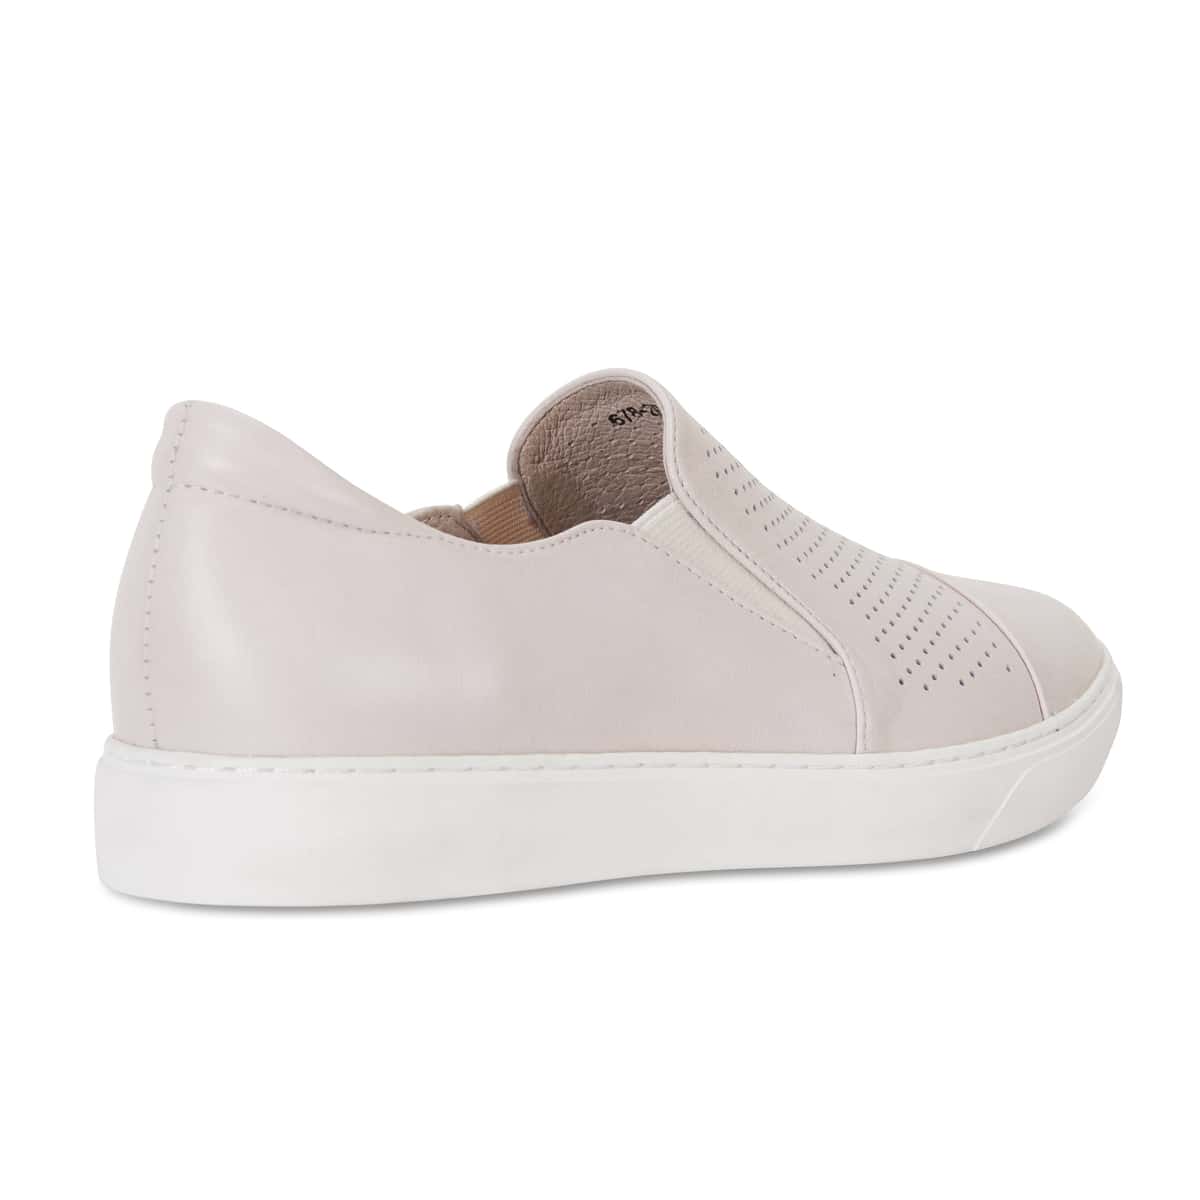 Celina Sneaker in Taupe Leather